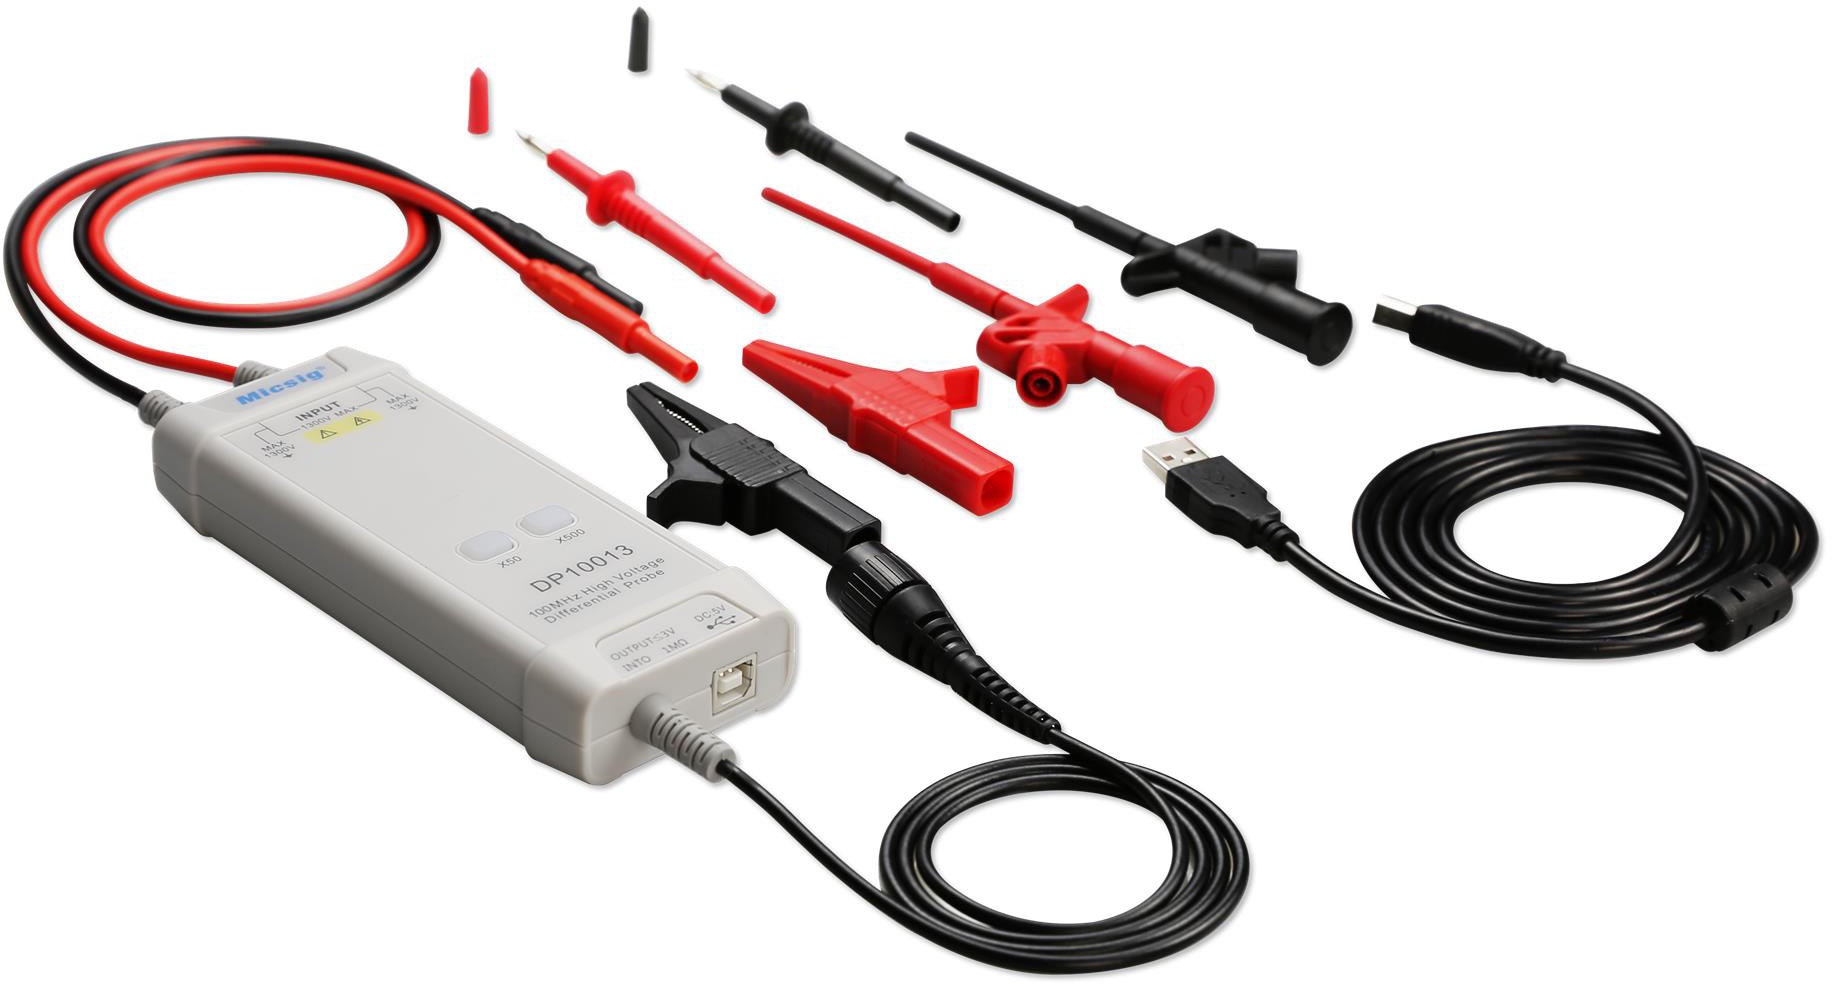 Lightweight 1 Set DP20003 High Voltage Probe 5600V 100M Oscilloscope Probe with USB Interface for lab for Floating Measurement